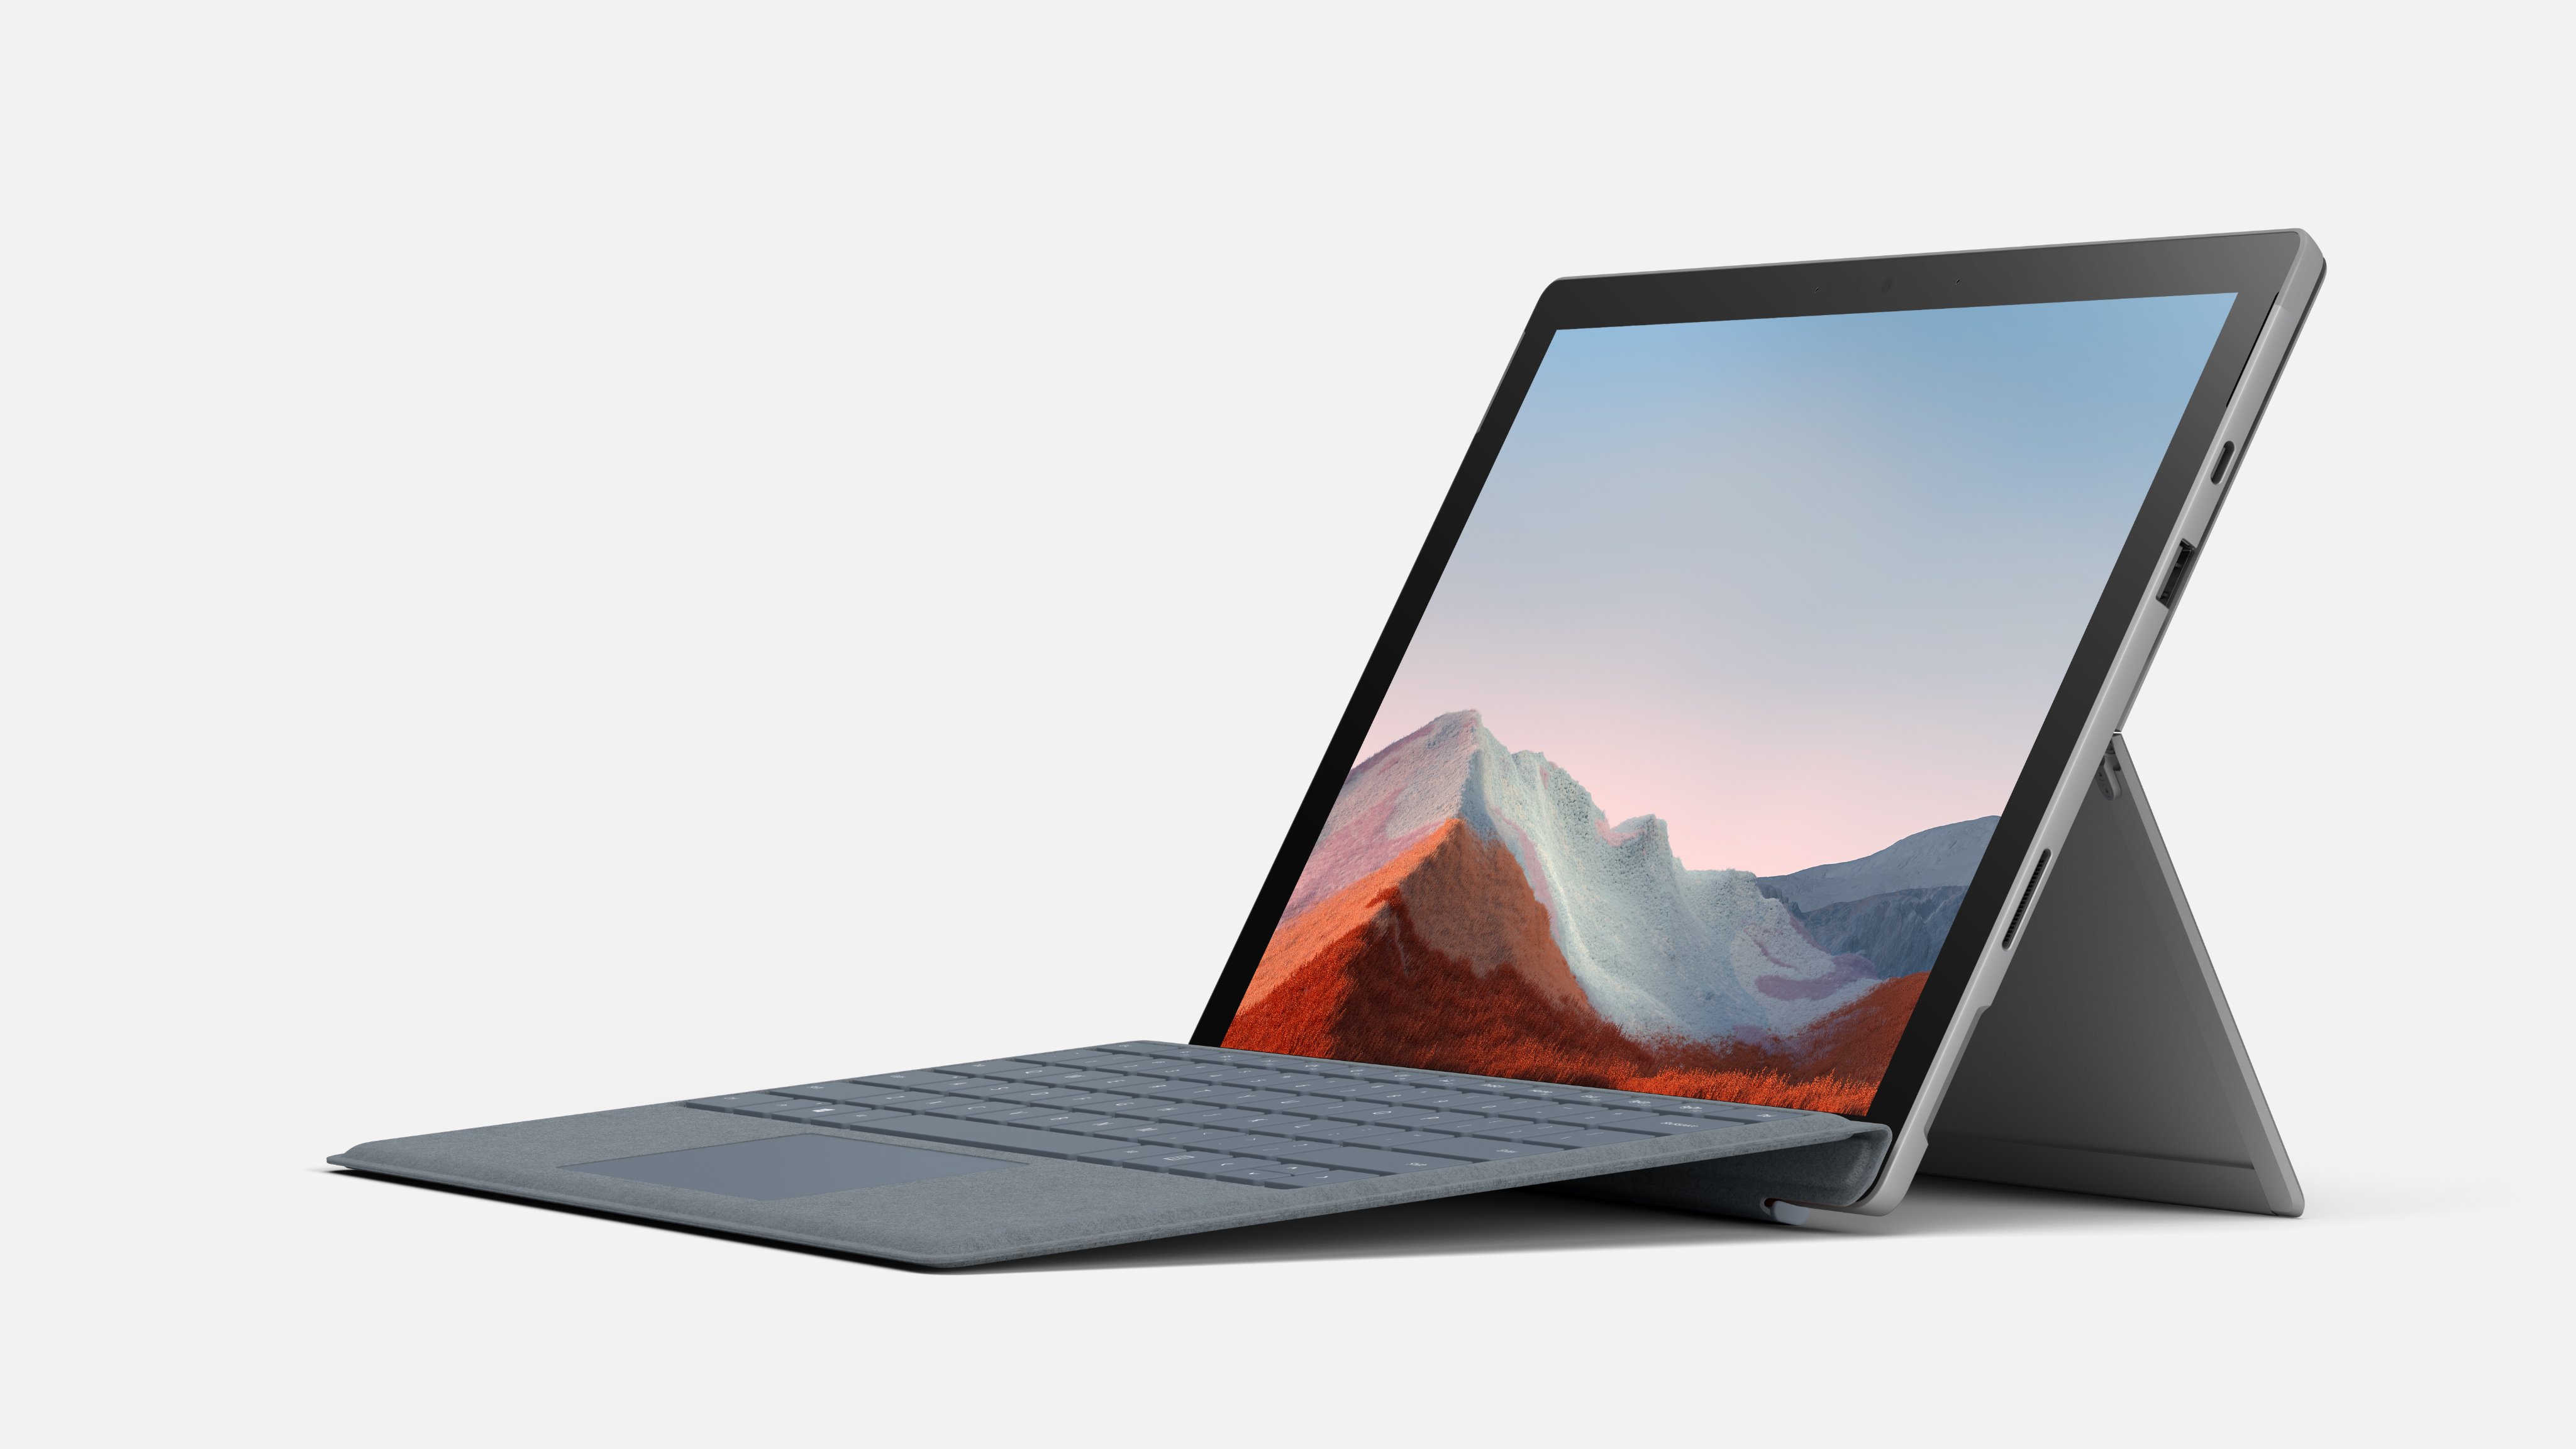 Microsoft Surface Pro 7 Plus launches with larger battery, replaceable SSD, Tiger Lake processors and LTE support